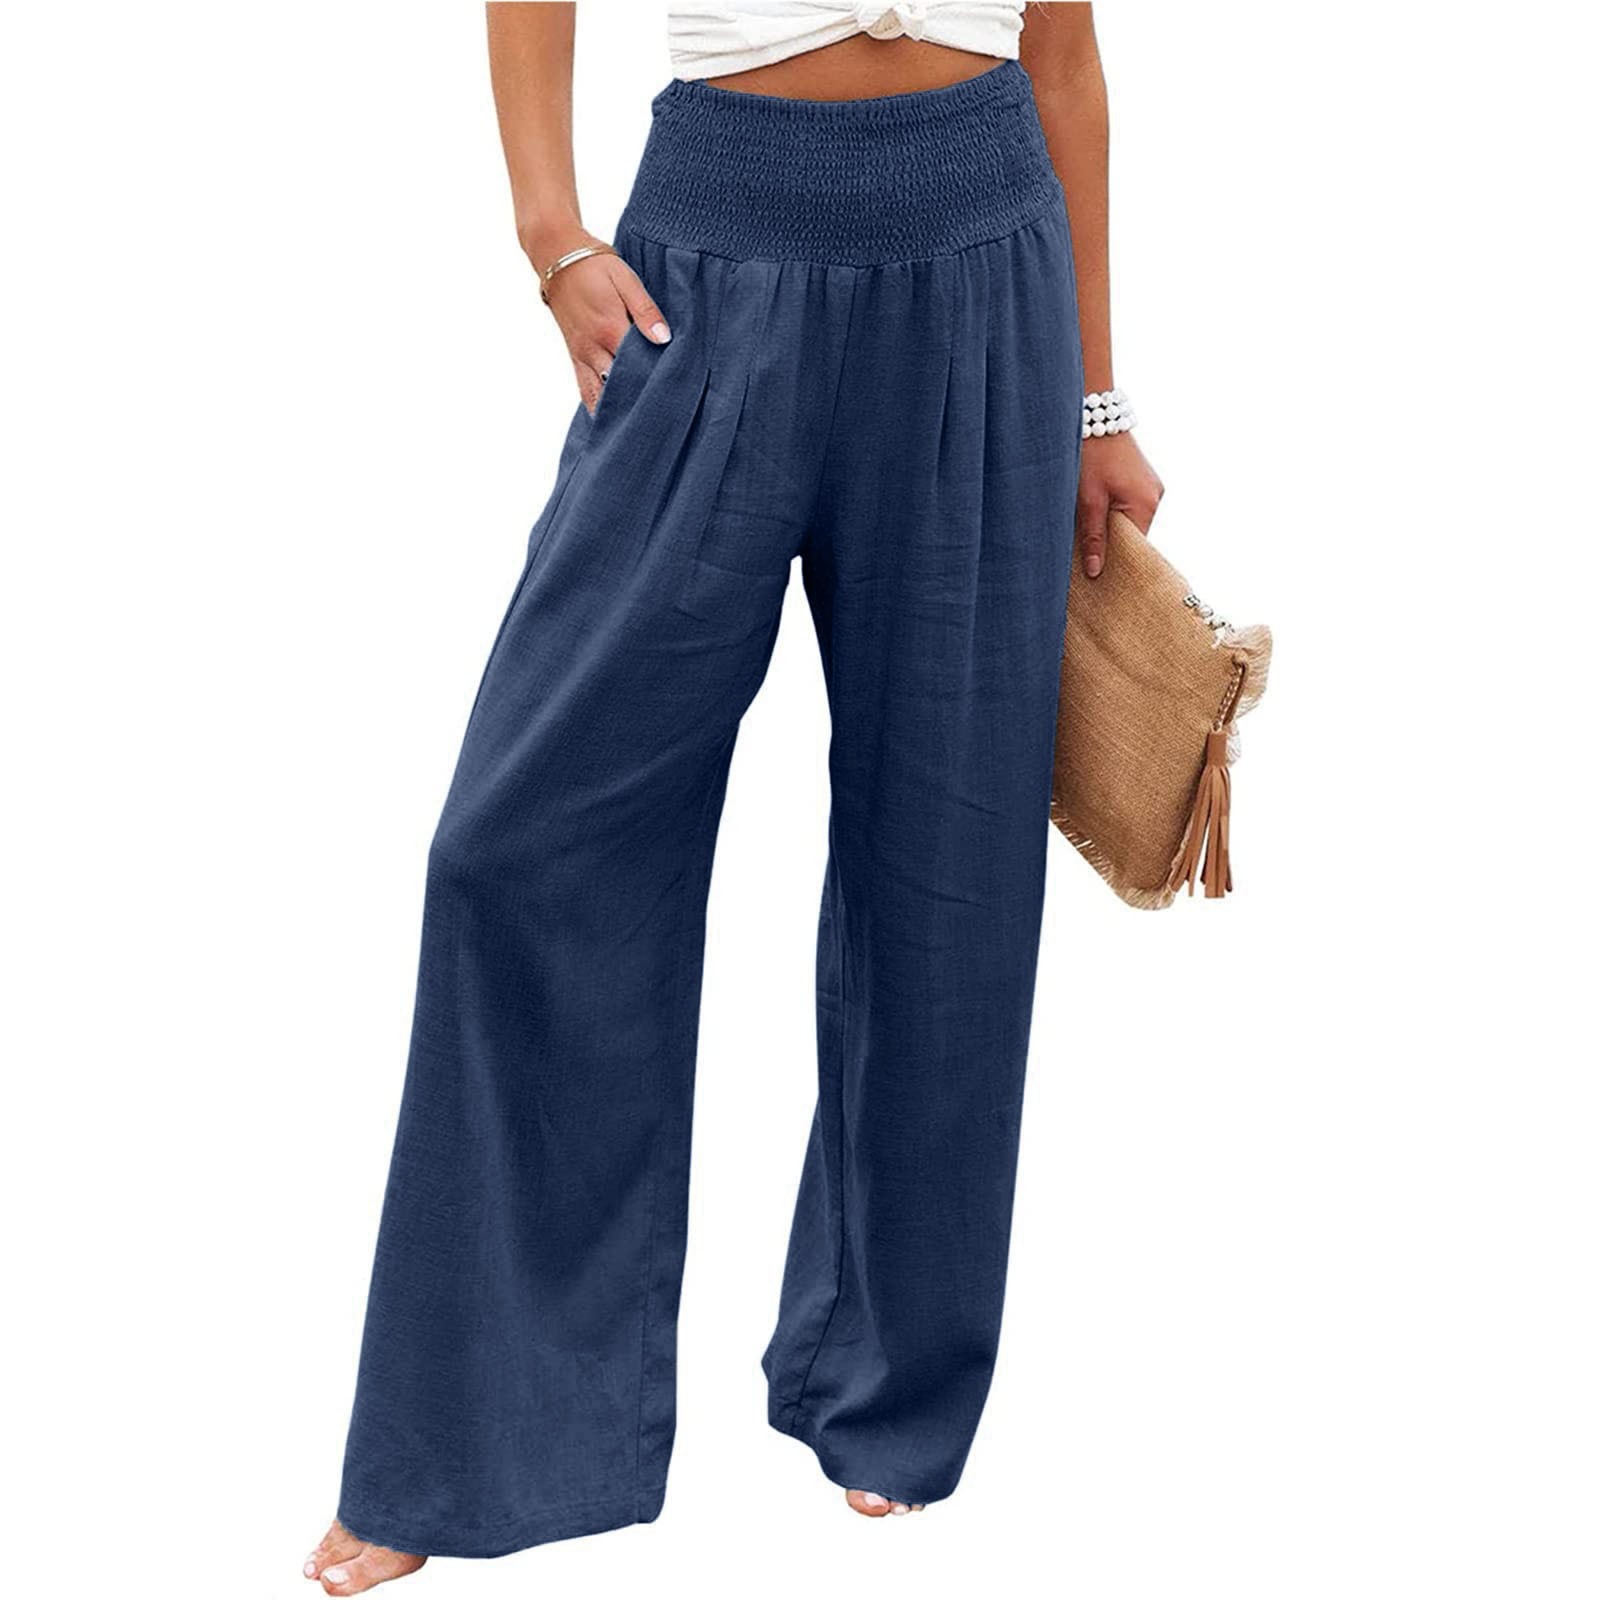 Difdany Women's Fashion Loose Casual Solid High Waist Wide Leg Pants ...